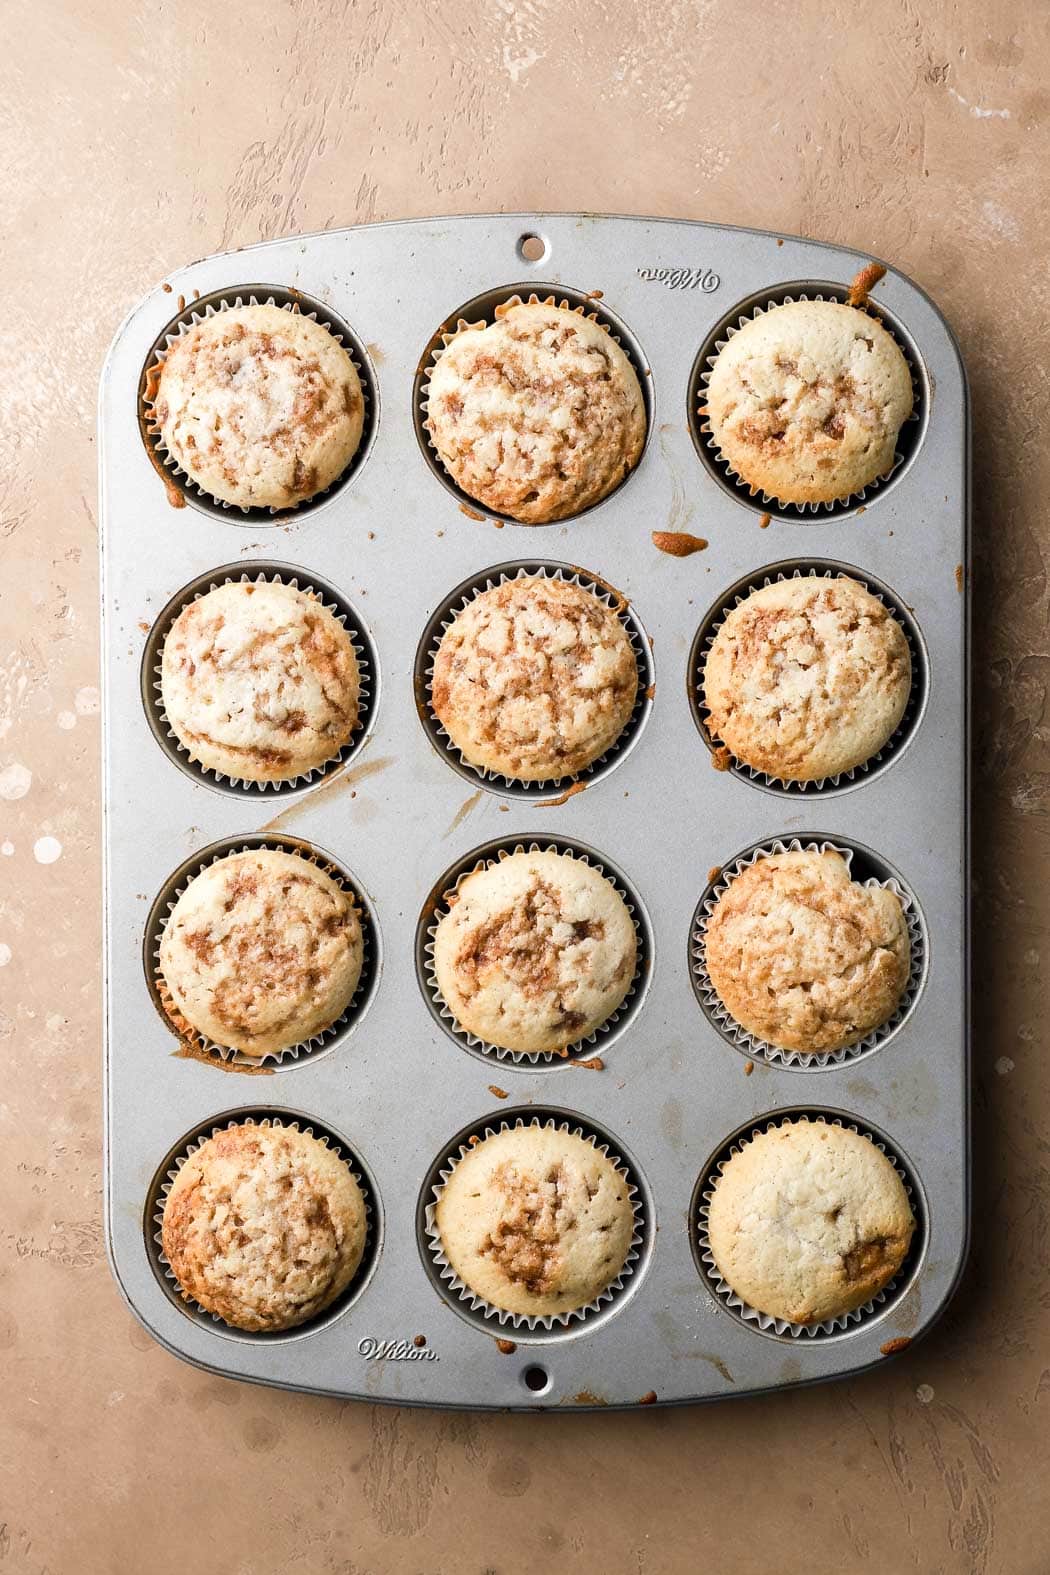 bake until puffed and no longer wet